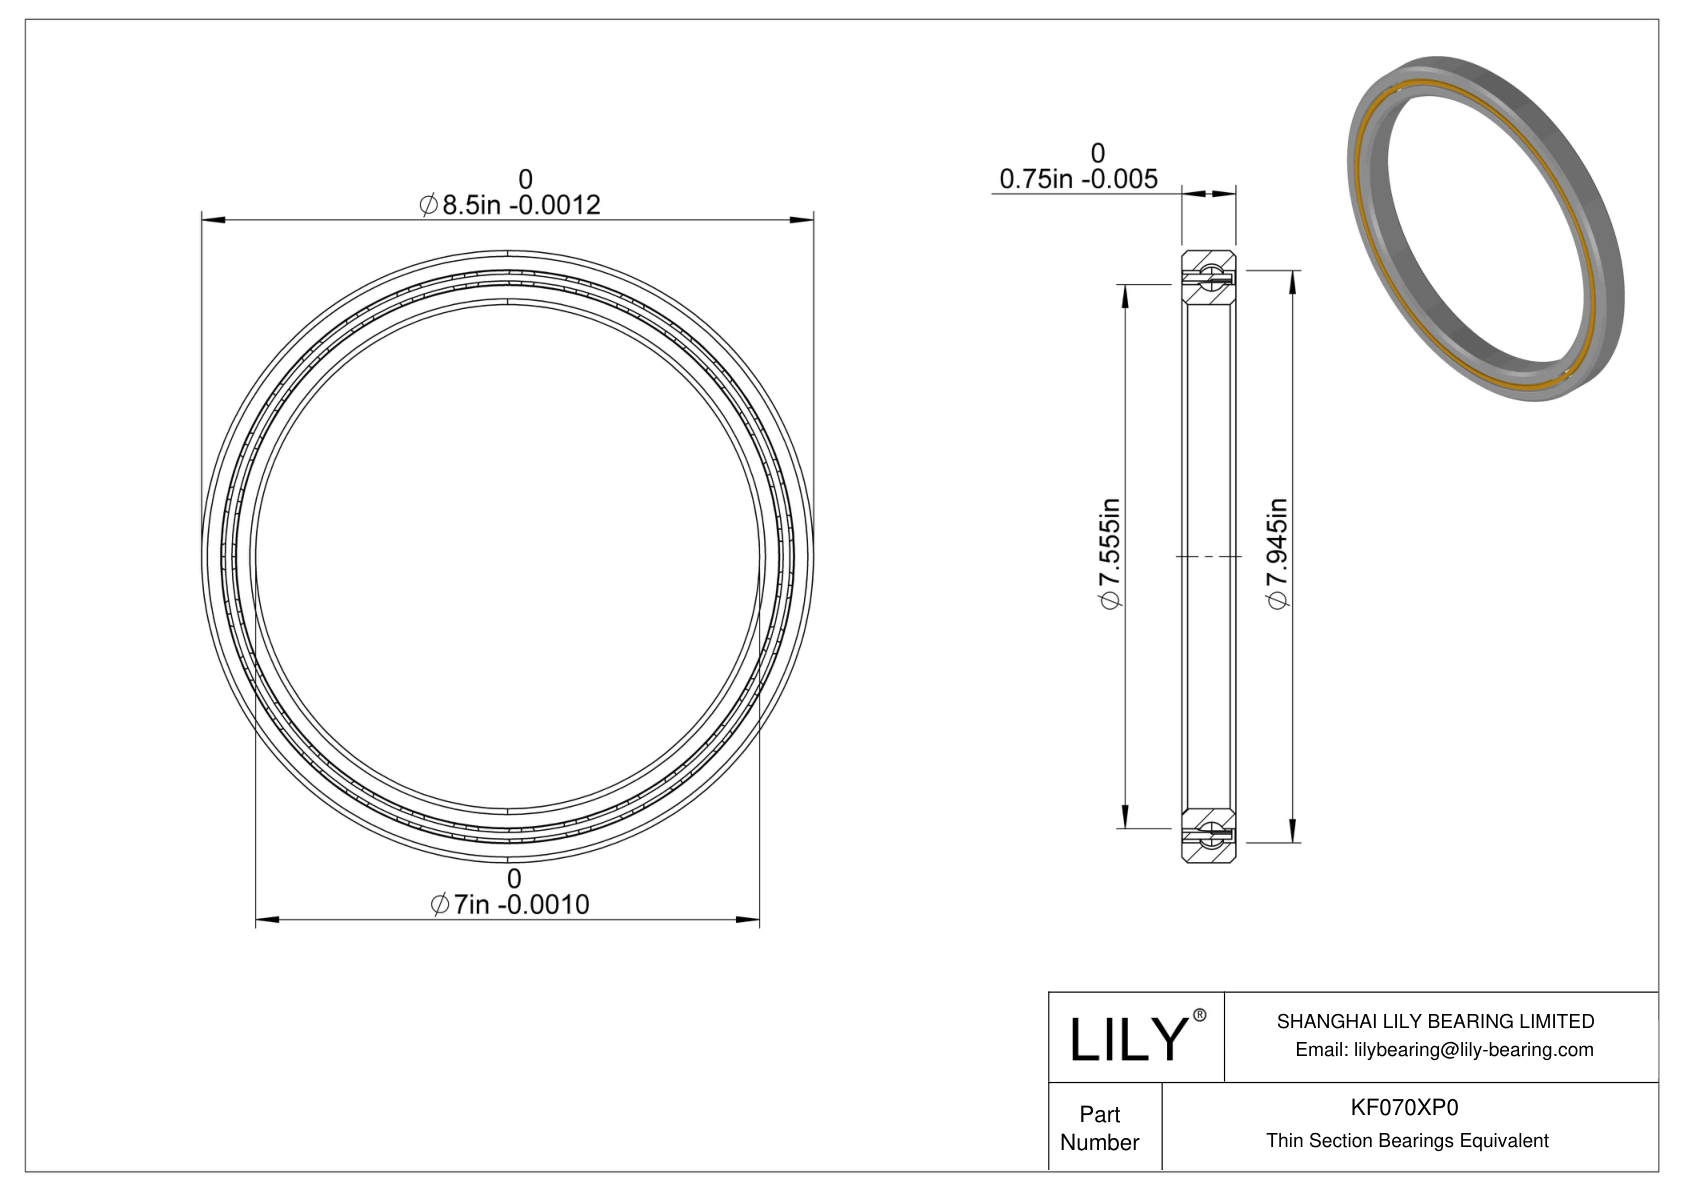 KF070XP0 Constant Section (CS) Bearings cad drawing